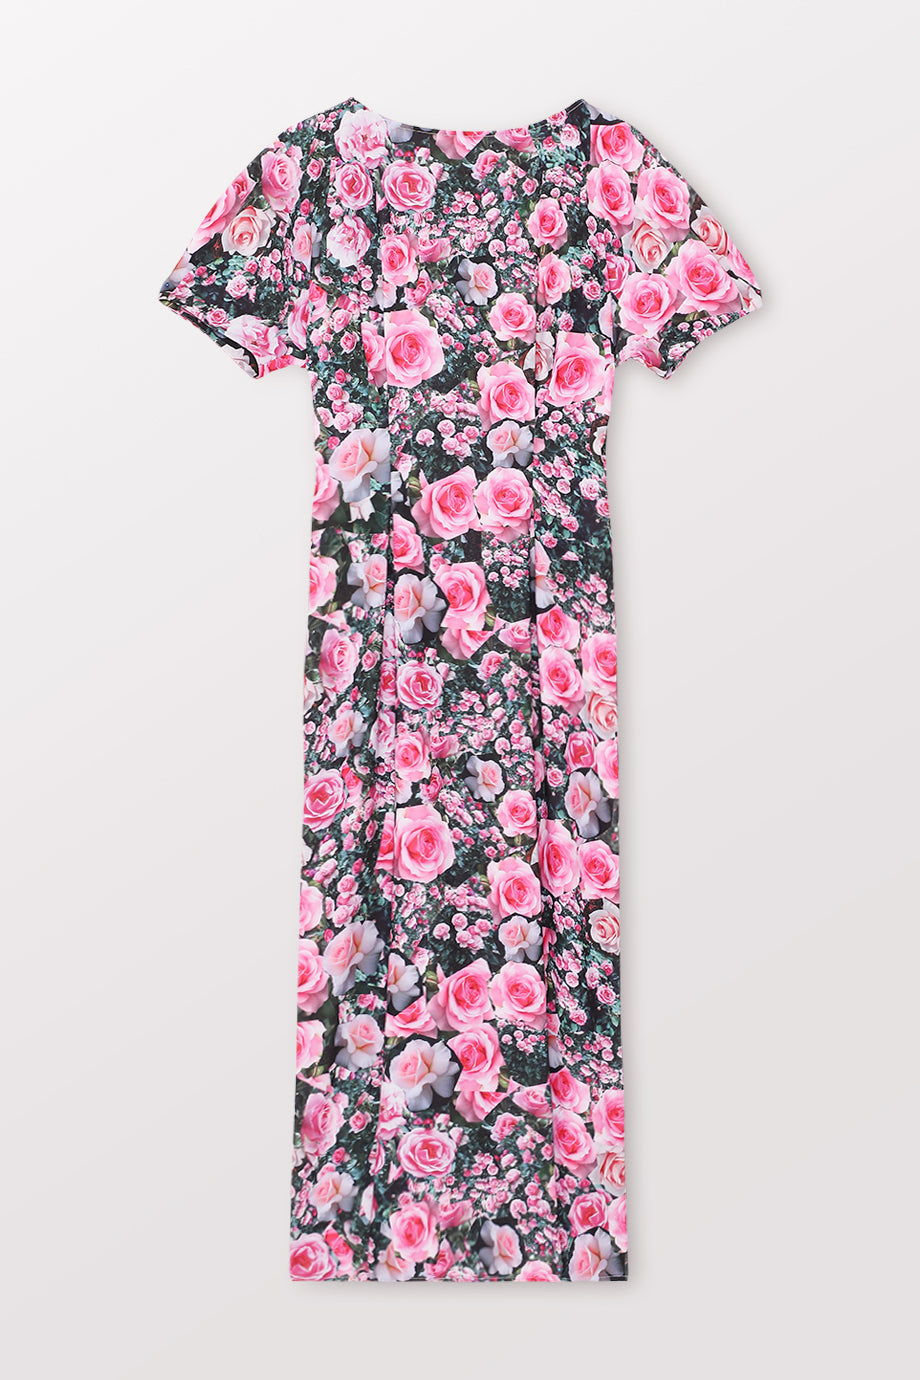 Christopher Kane The Rose Garden Midi Dress in Pink. Front view. Shop from Etoile La Boutique.